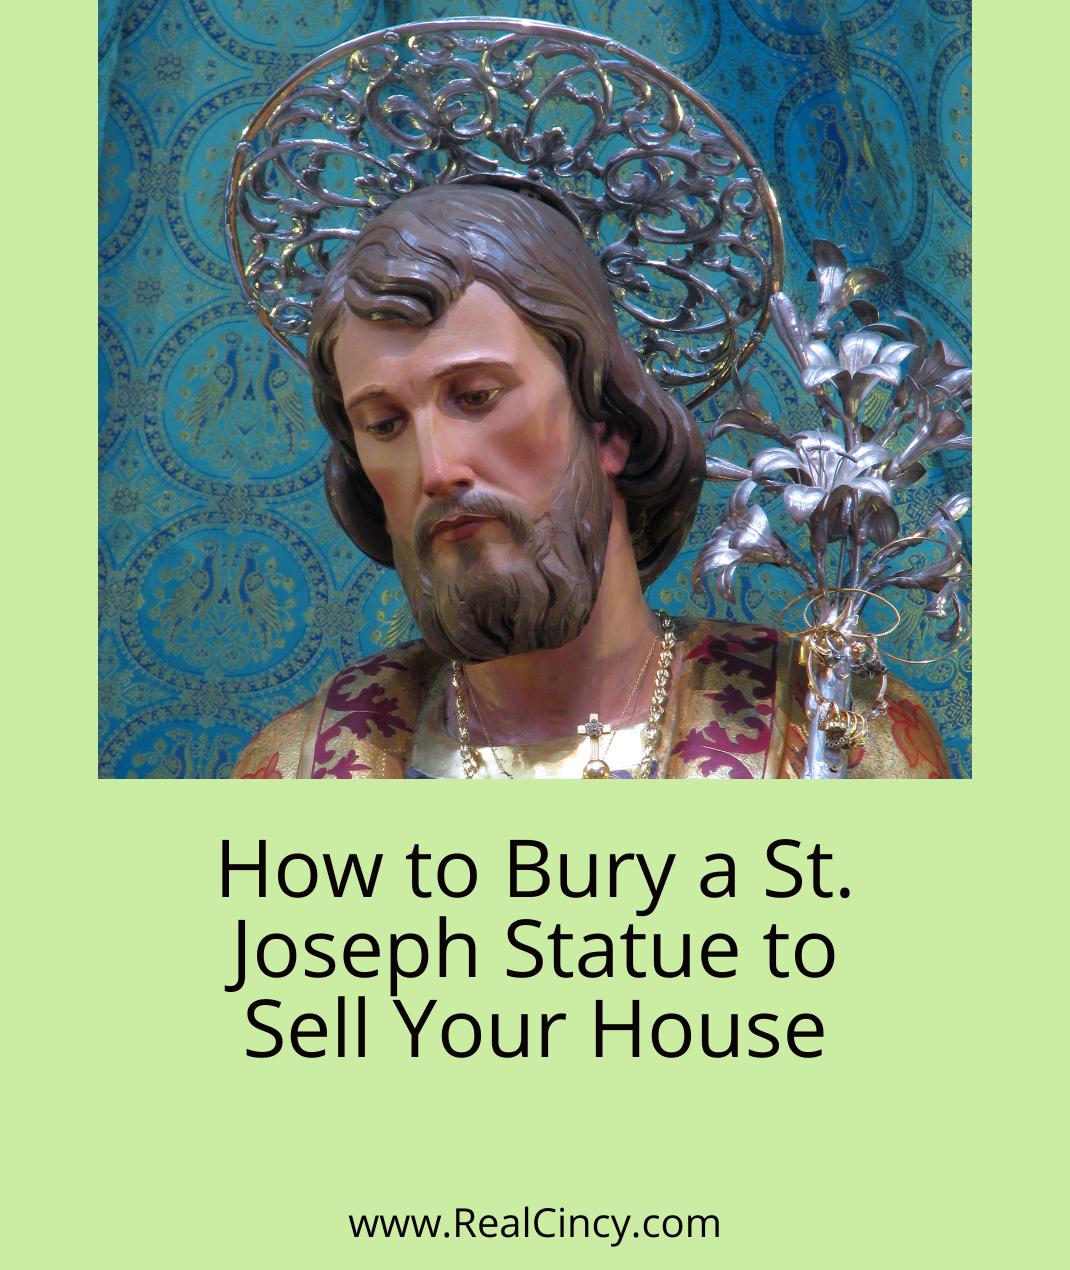 How to Bury a St. Joseph Statue to Sell Your House